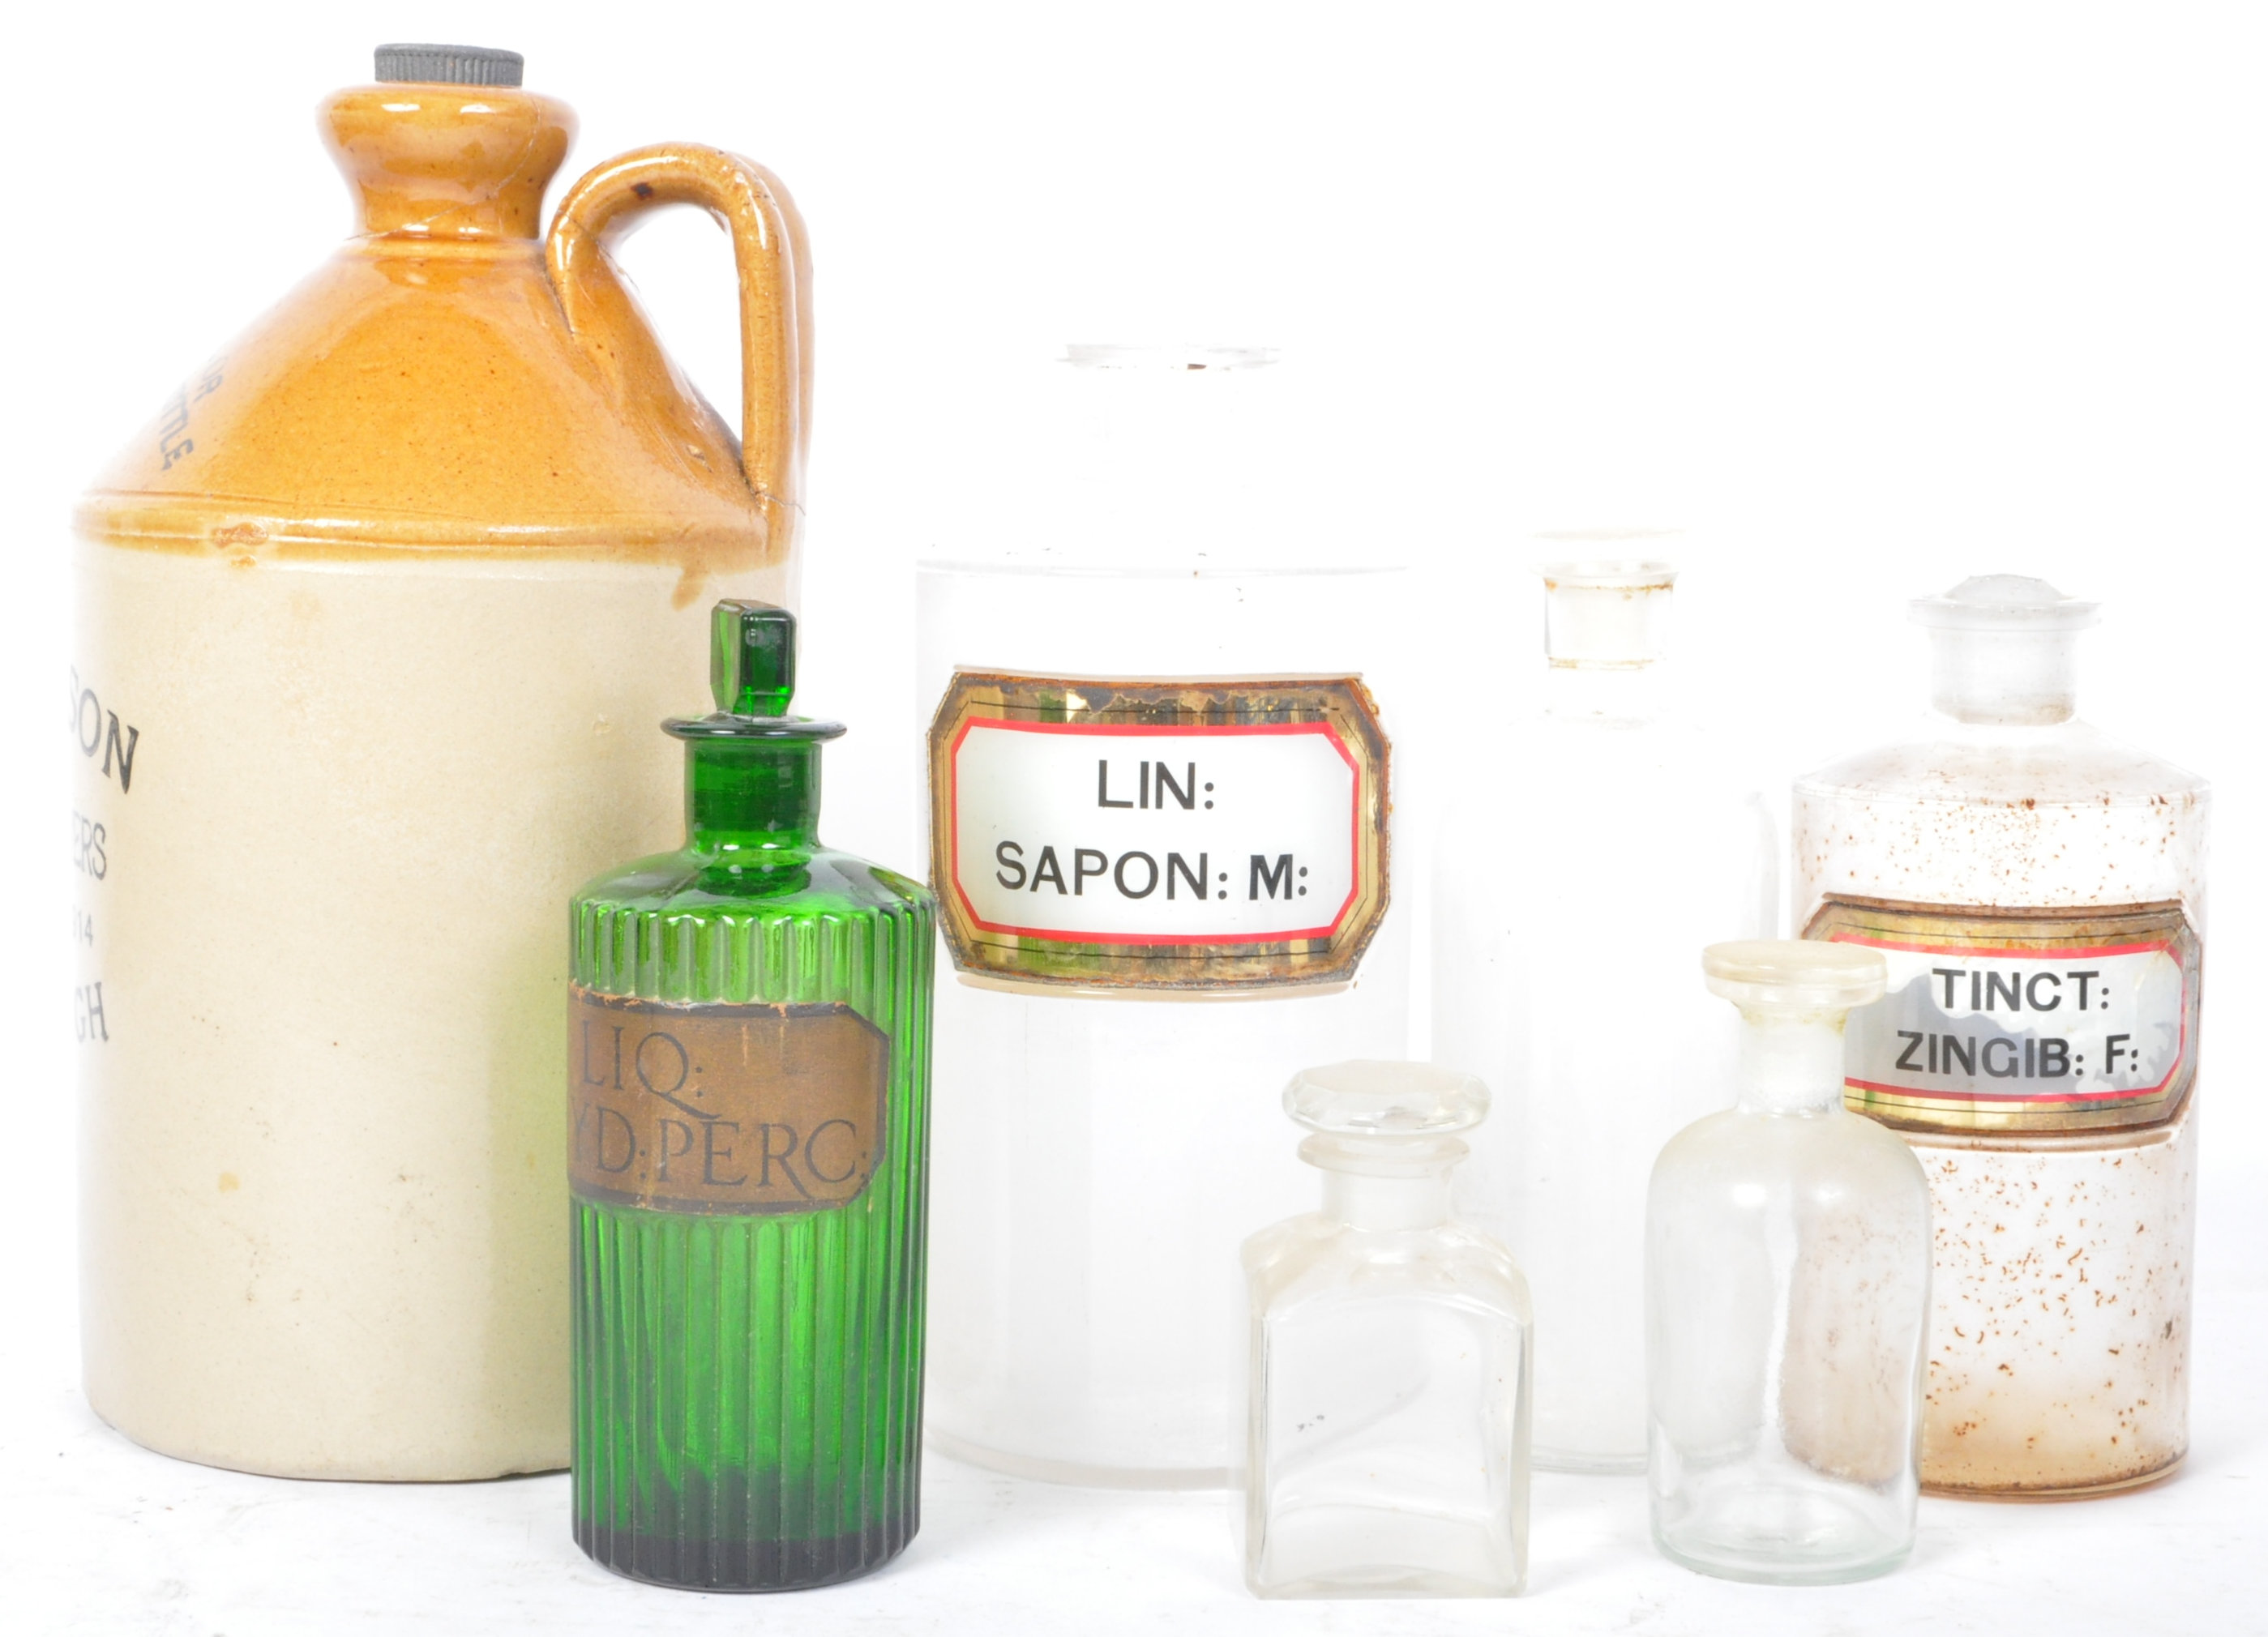 COLLECTION OF EARLY 20TH CENTURY PHARMACY GLASS BOTTLES